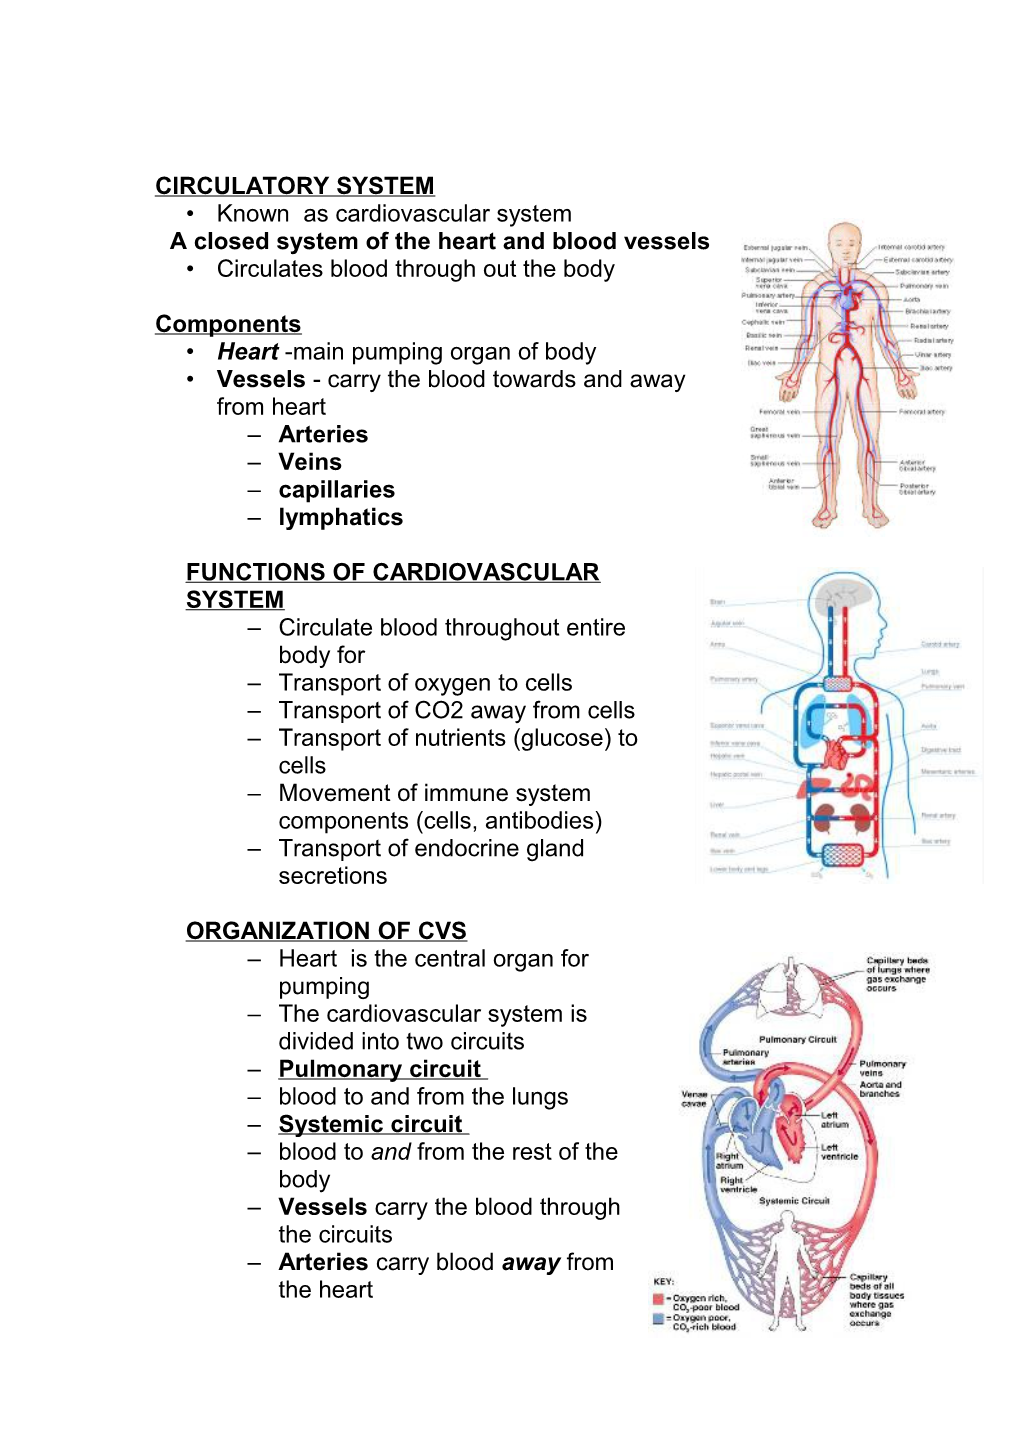 Over View of Circulatory System